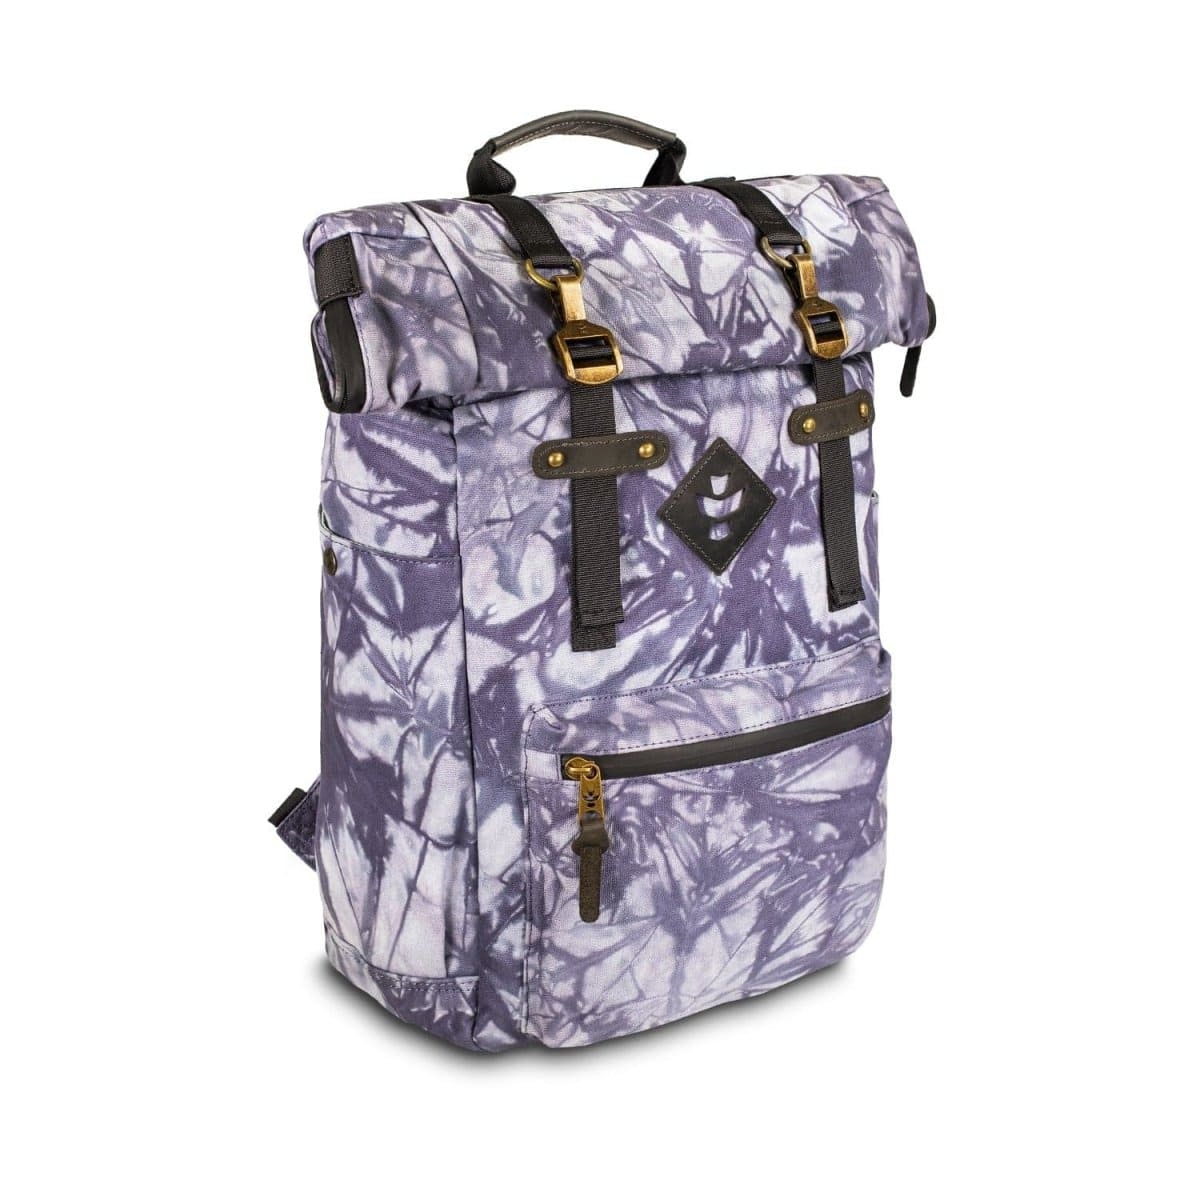 Revelry Supply Travel Bag Tie Dye The Drifter - Smell Proof Rolltop Backpack